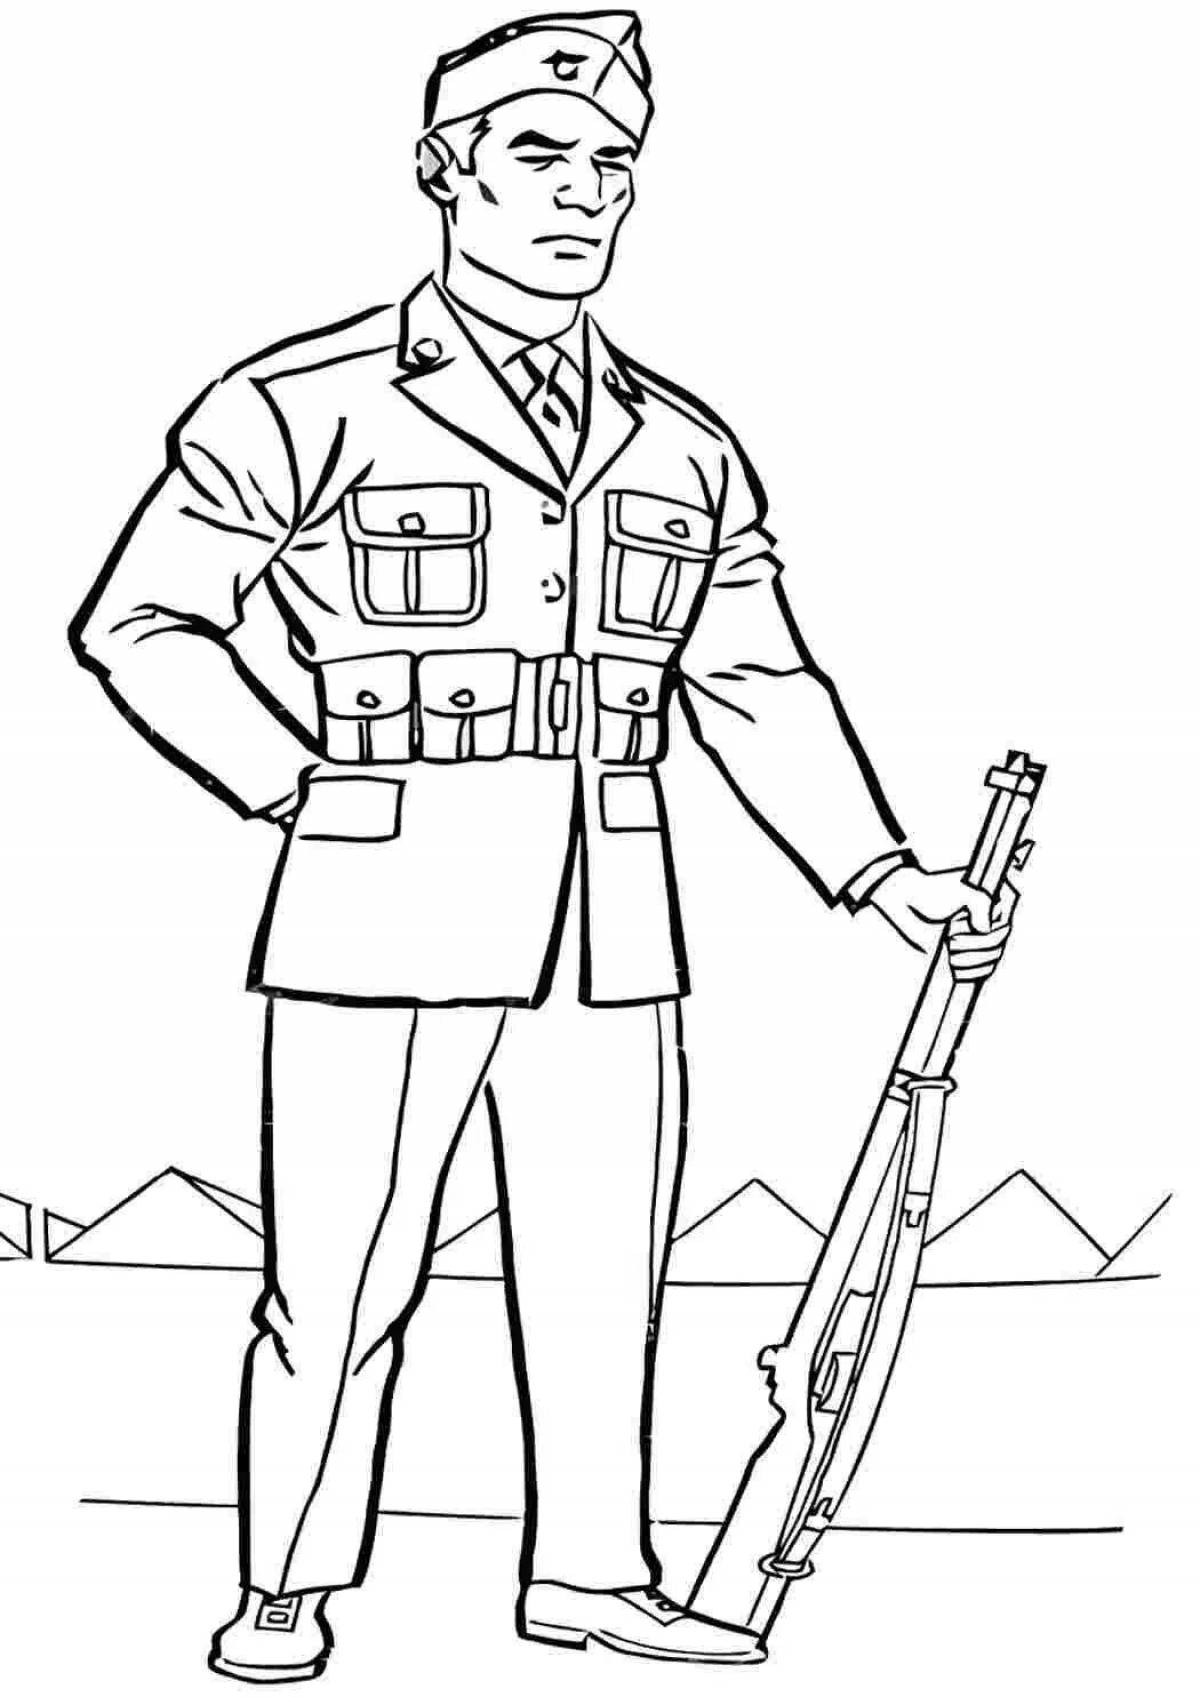 Attractive military coloring pages for kids